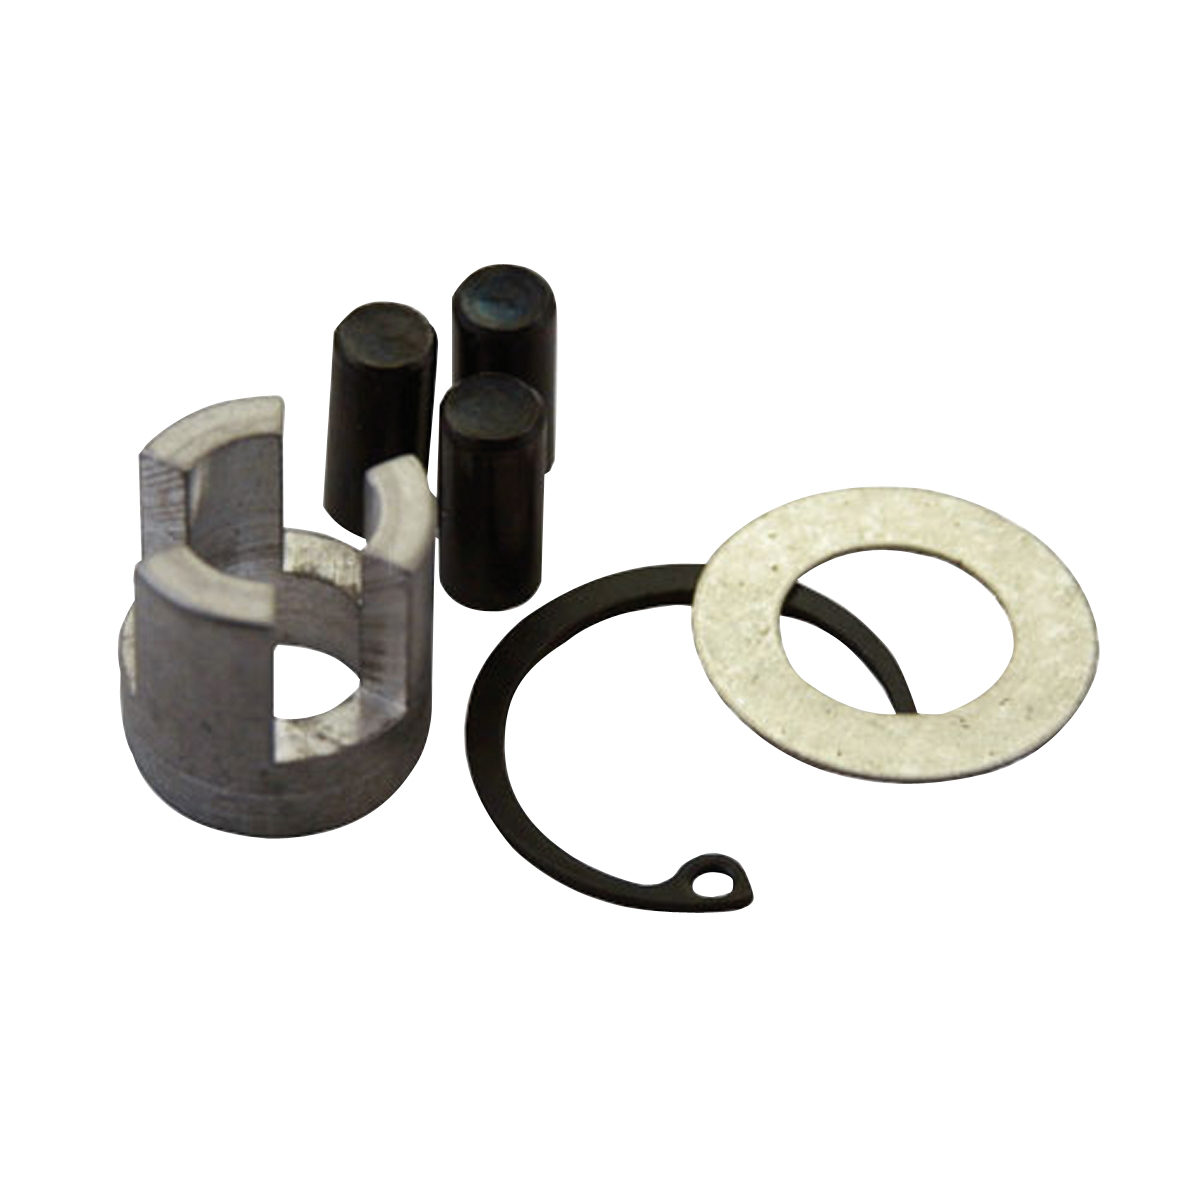 Internal Replacement Parts for 200-3/8 3/8 Inch Stud Puller